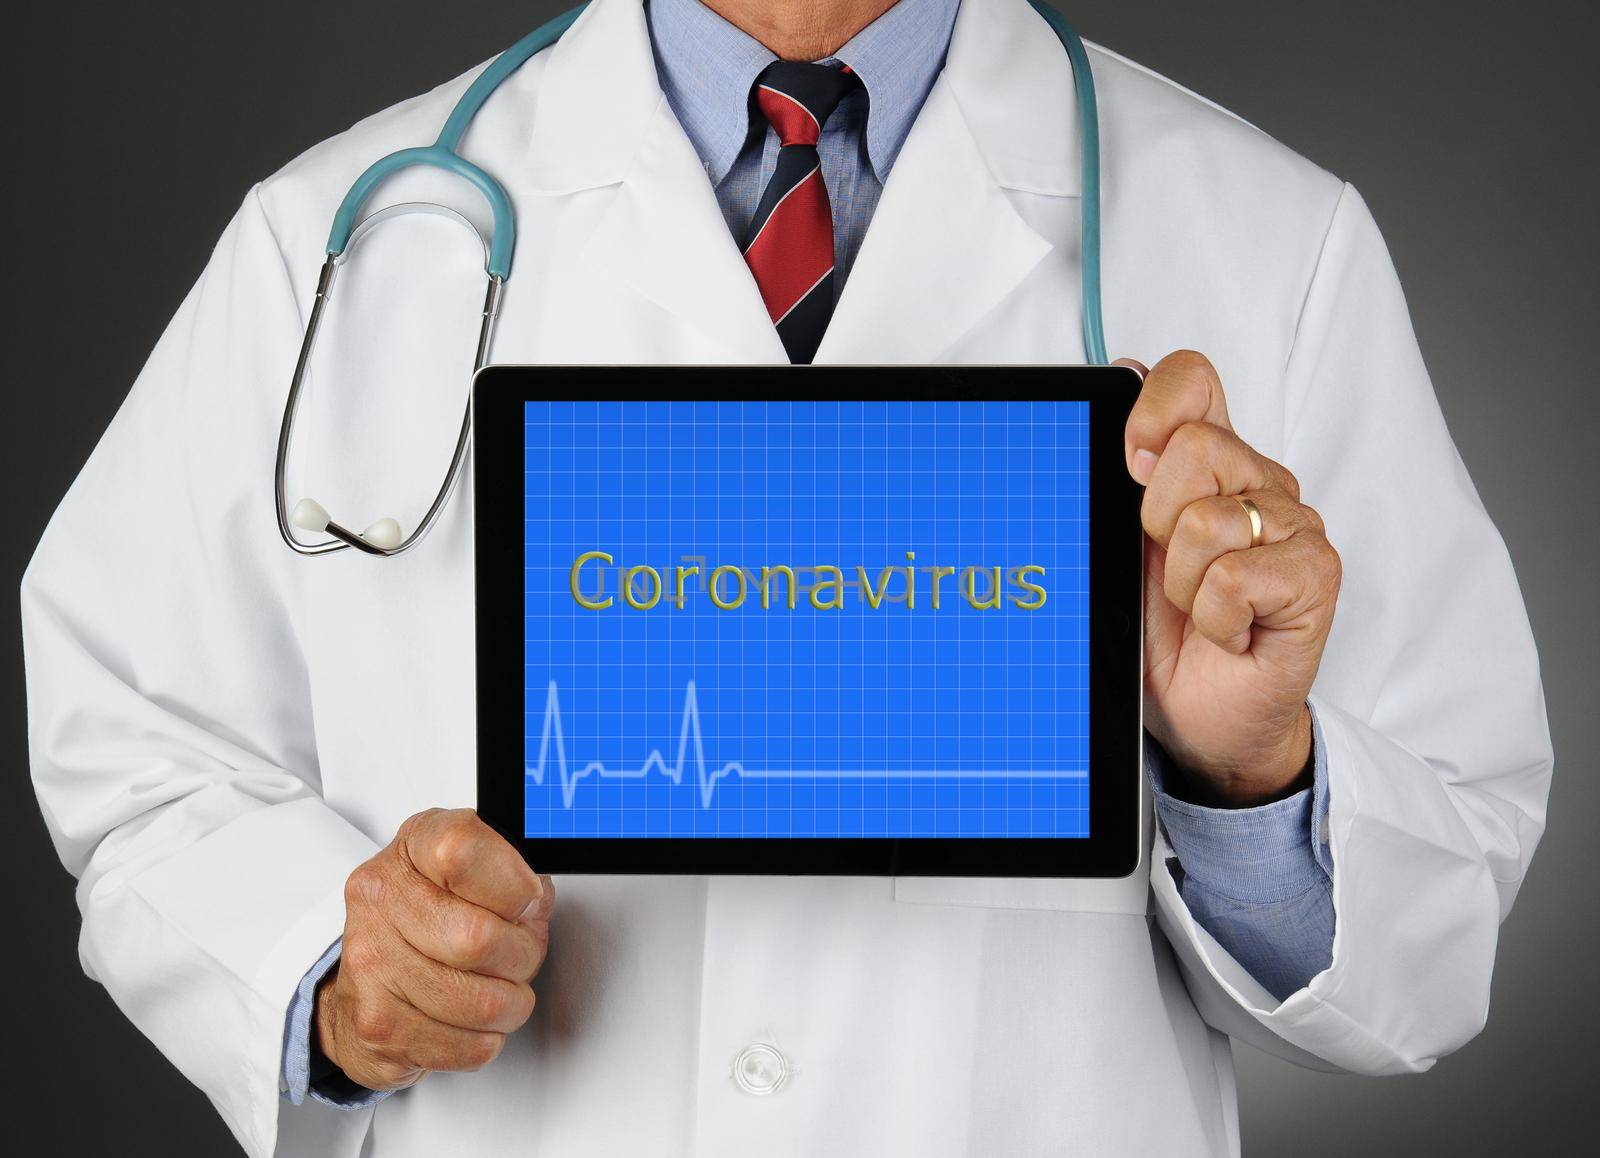 Closeup of a doctor holding a tablet computer with Coronavirus written on the screen.  Horizontal format over a light to dark gray background. Man is unrecognizable. by sCukrov